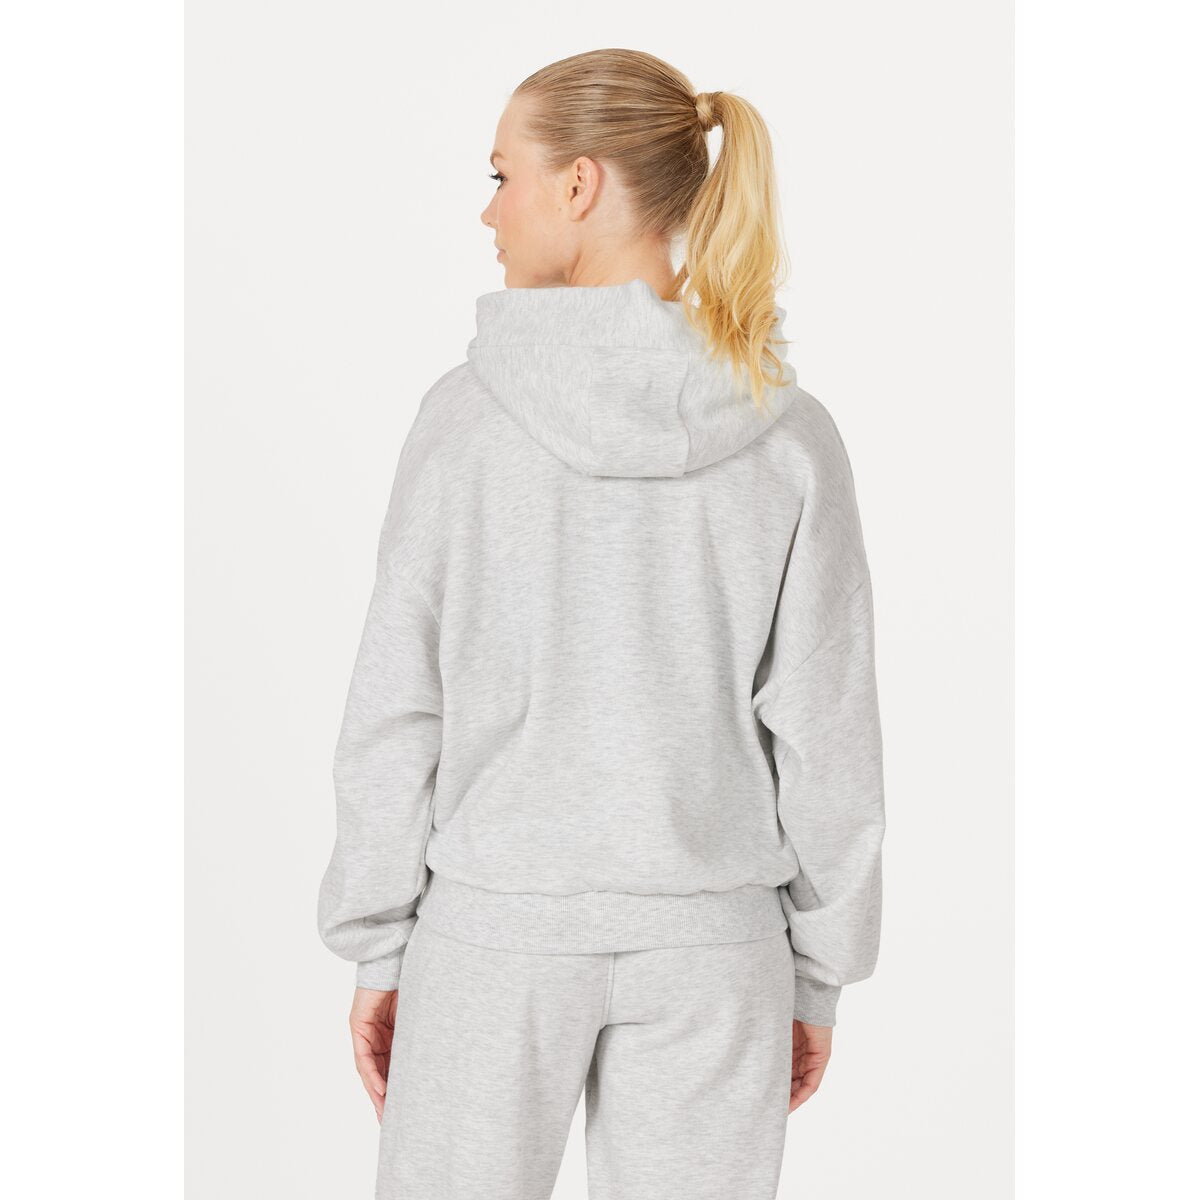 Athlecia Ruthie Womenswear Hoody 4 Shaws Department Stores